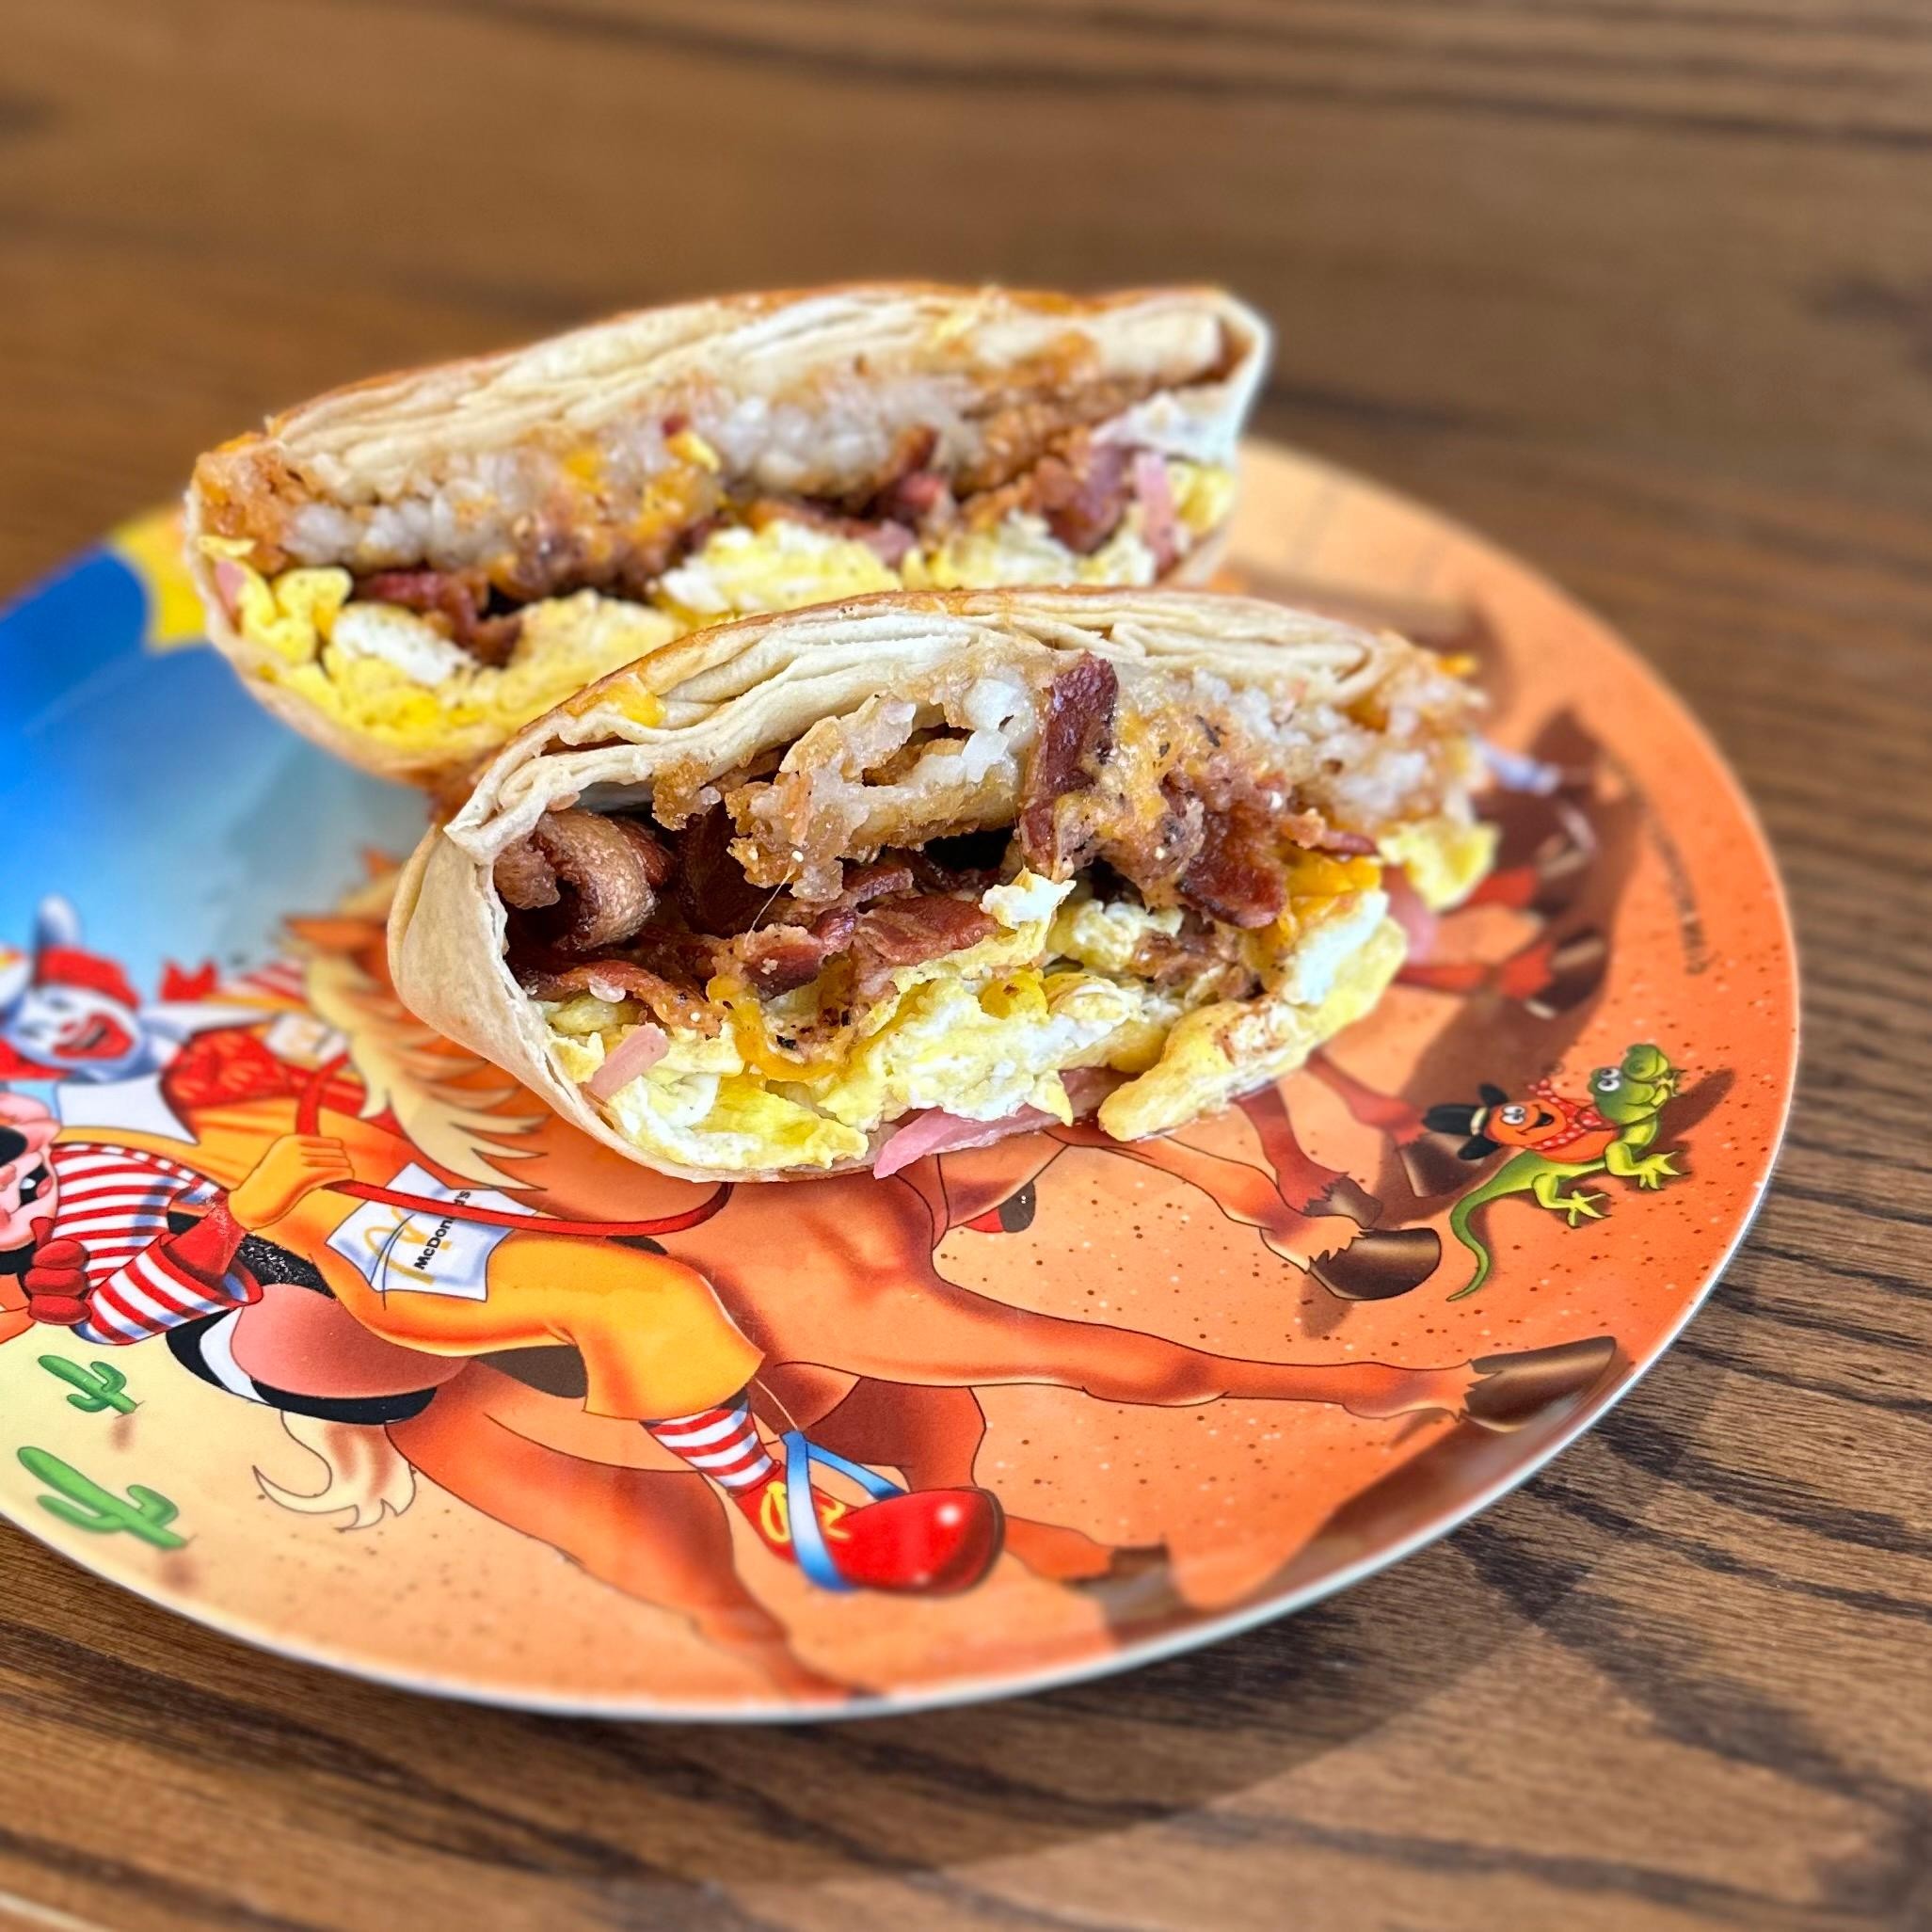 MYSTERY: BACON, EGG, AND CHEESE CRUNCHWRAP